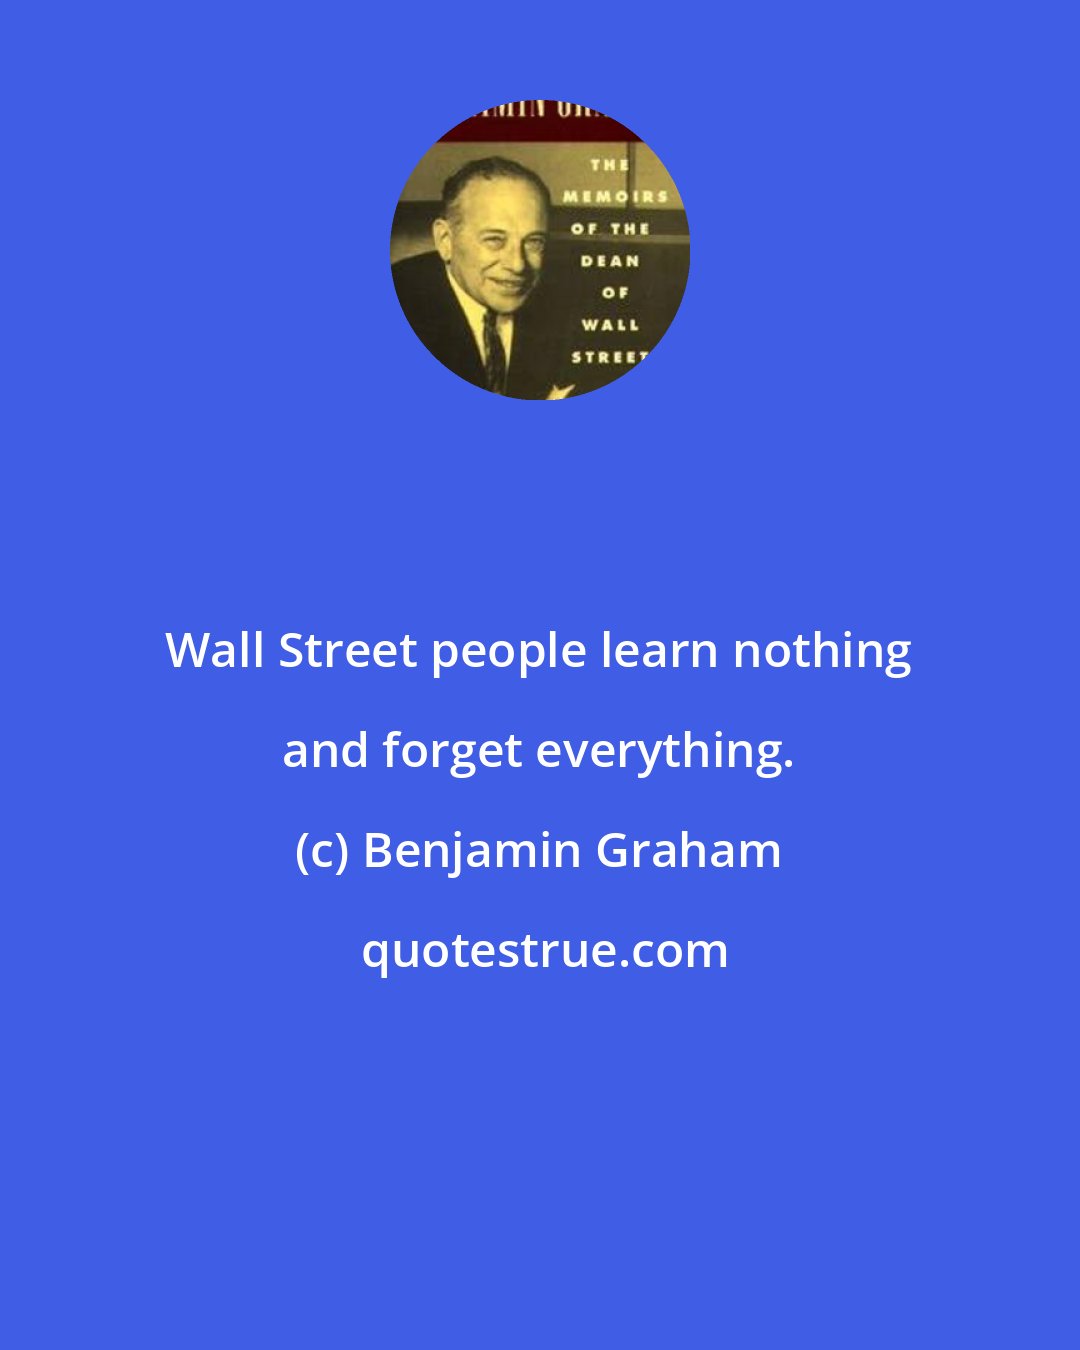 Benjamin Graham: Wall Street people learn nothing and forget everything.